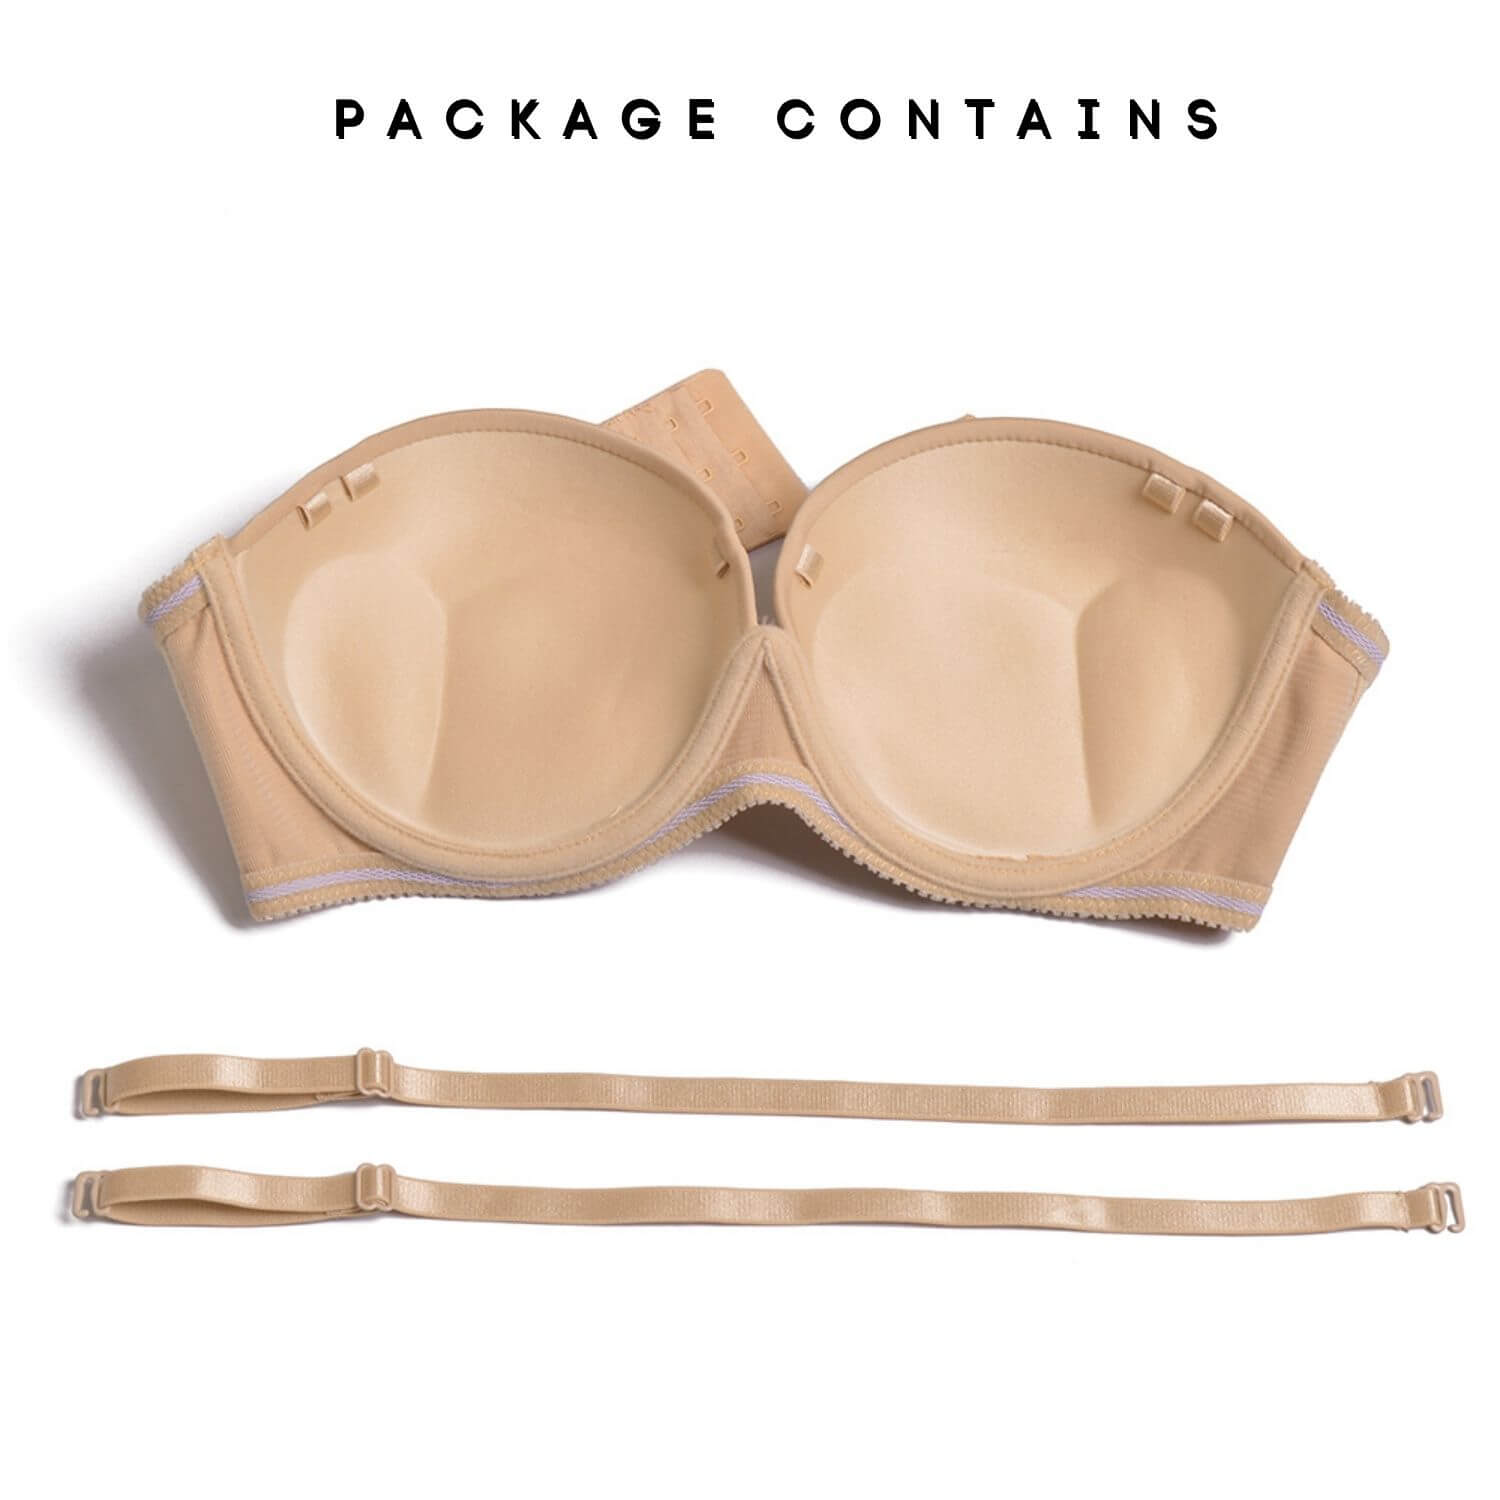 Strapless push up Bra package contains